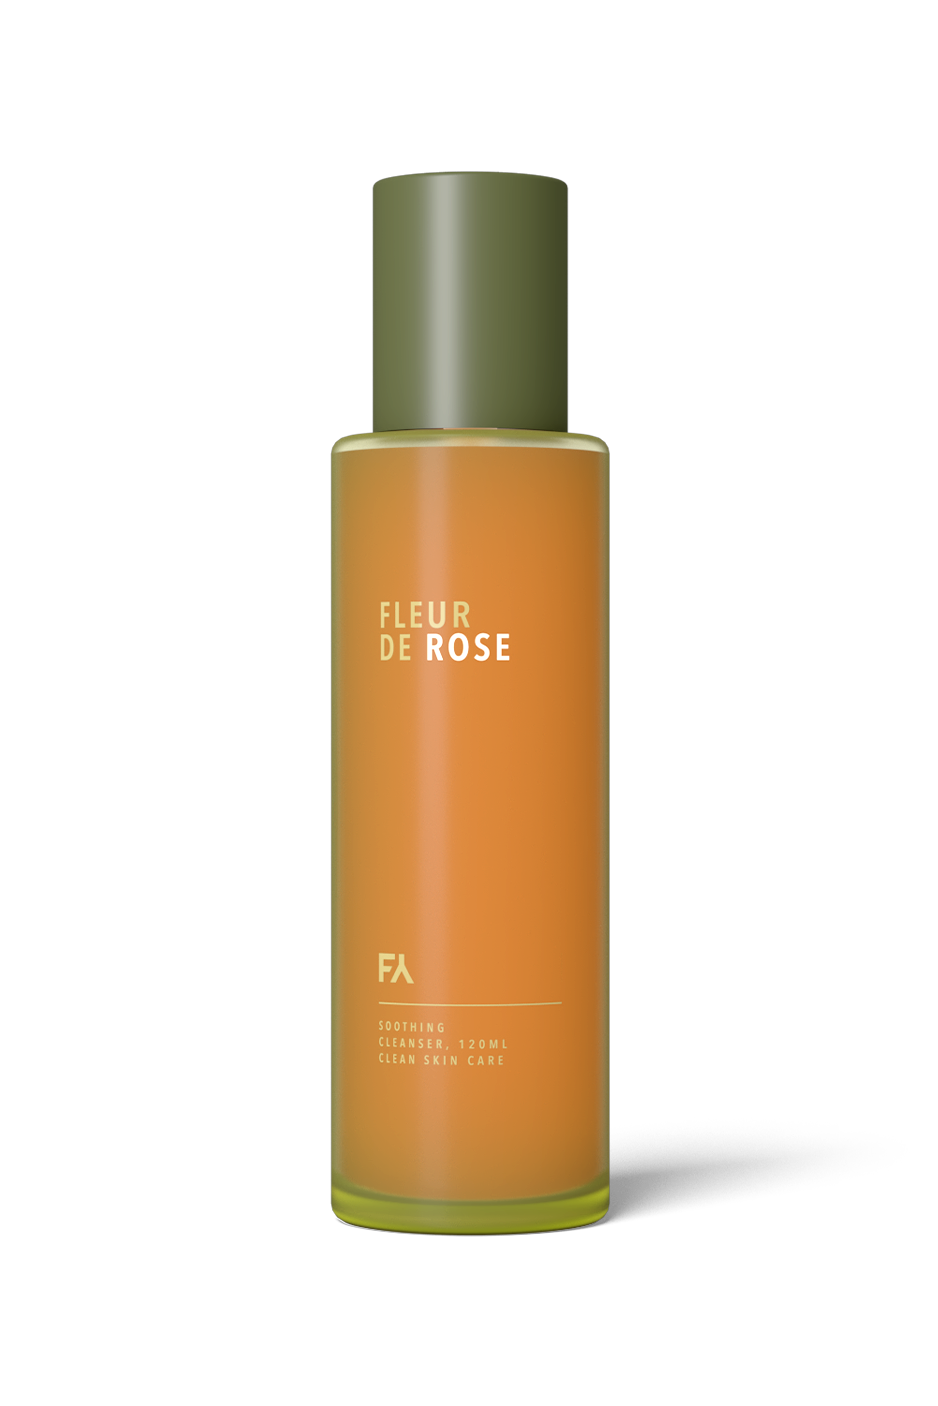 Product Image of Fleur de Rose Soothing Cleanser by Fields of Yarrow on transparent background